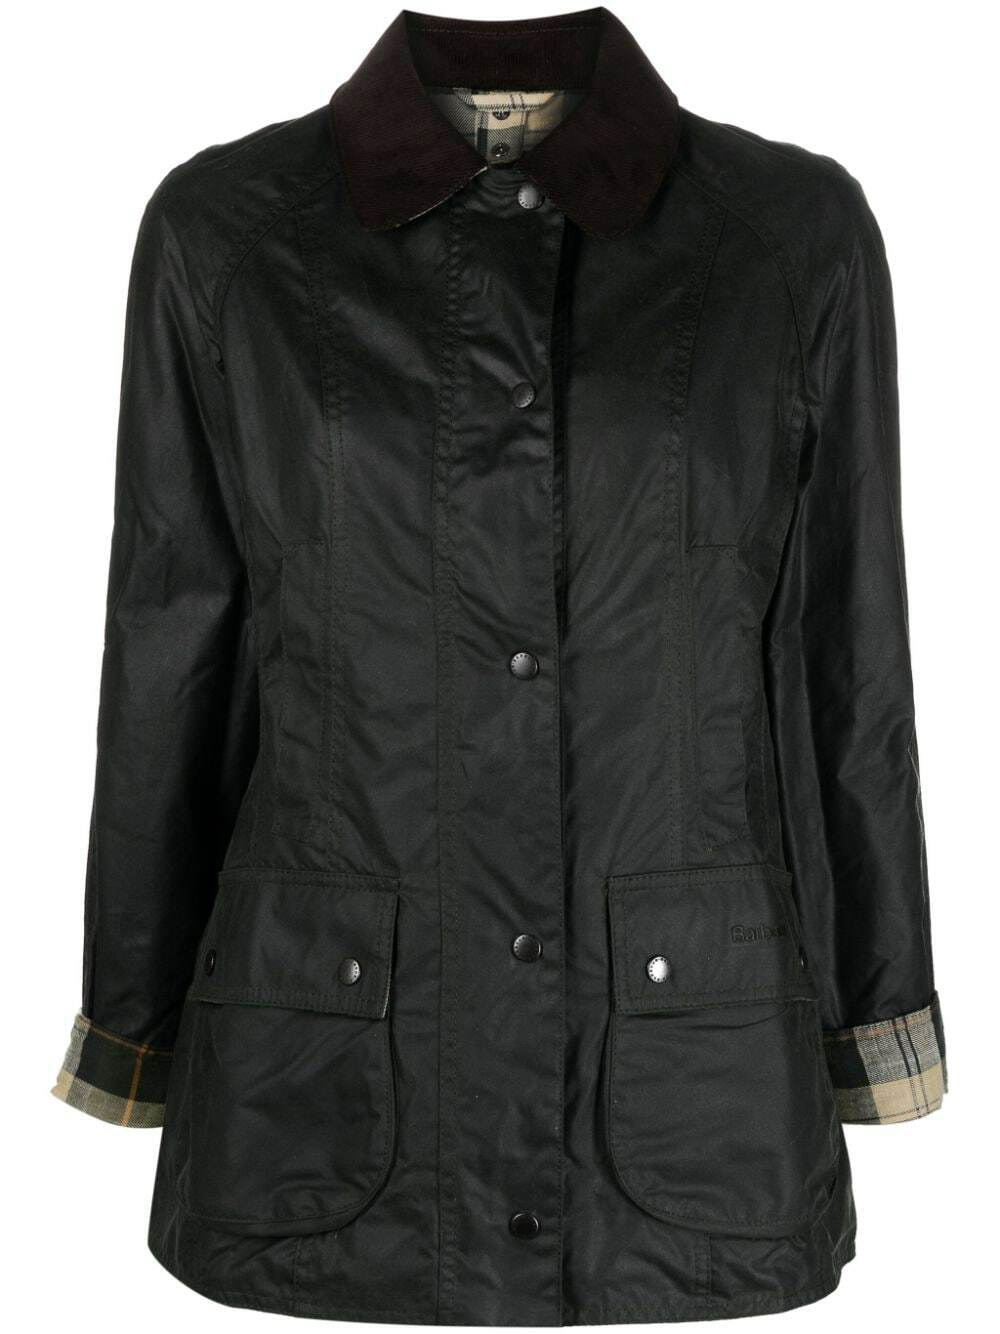 BARBOUR - Beadnell Wax Jacket Barbour